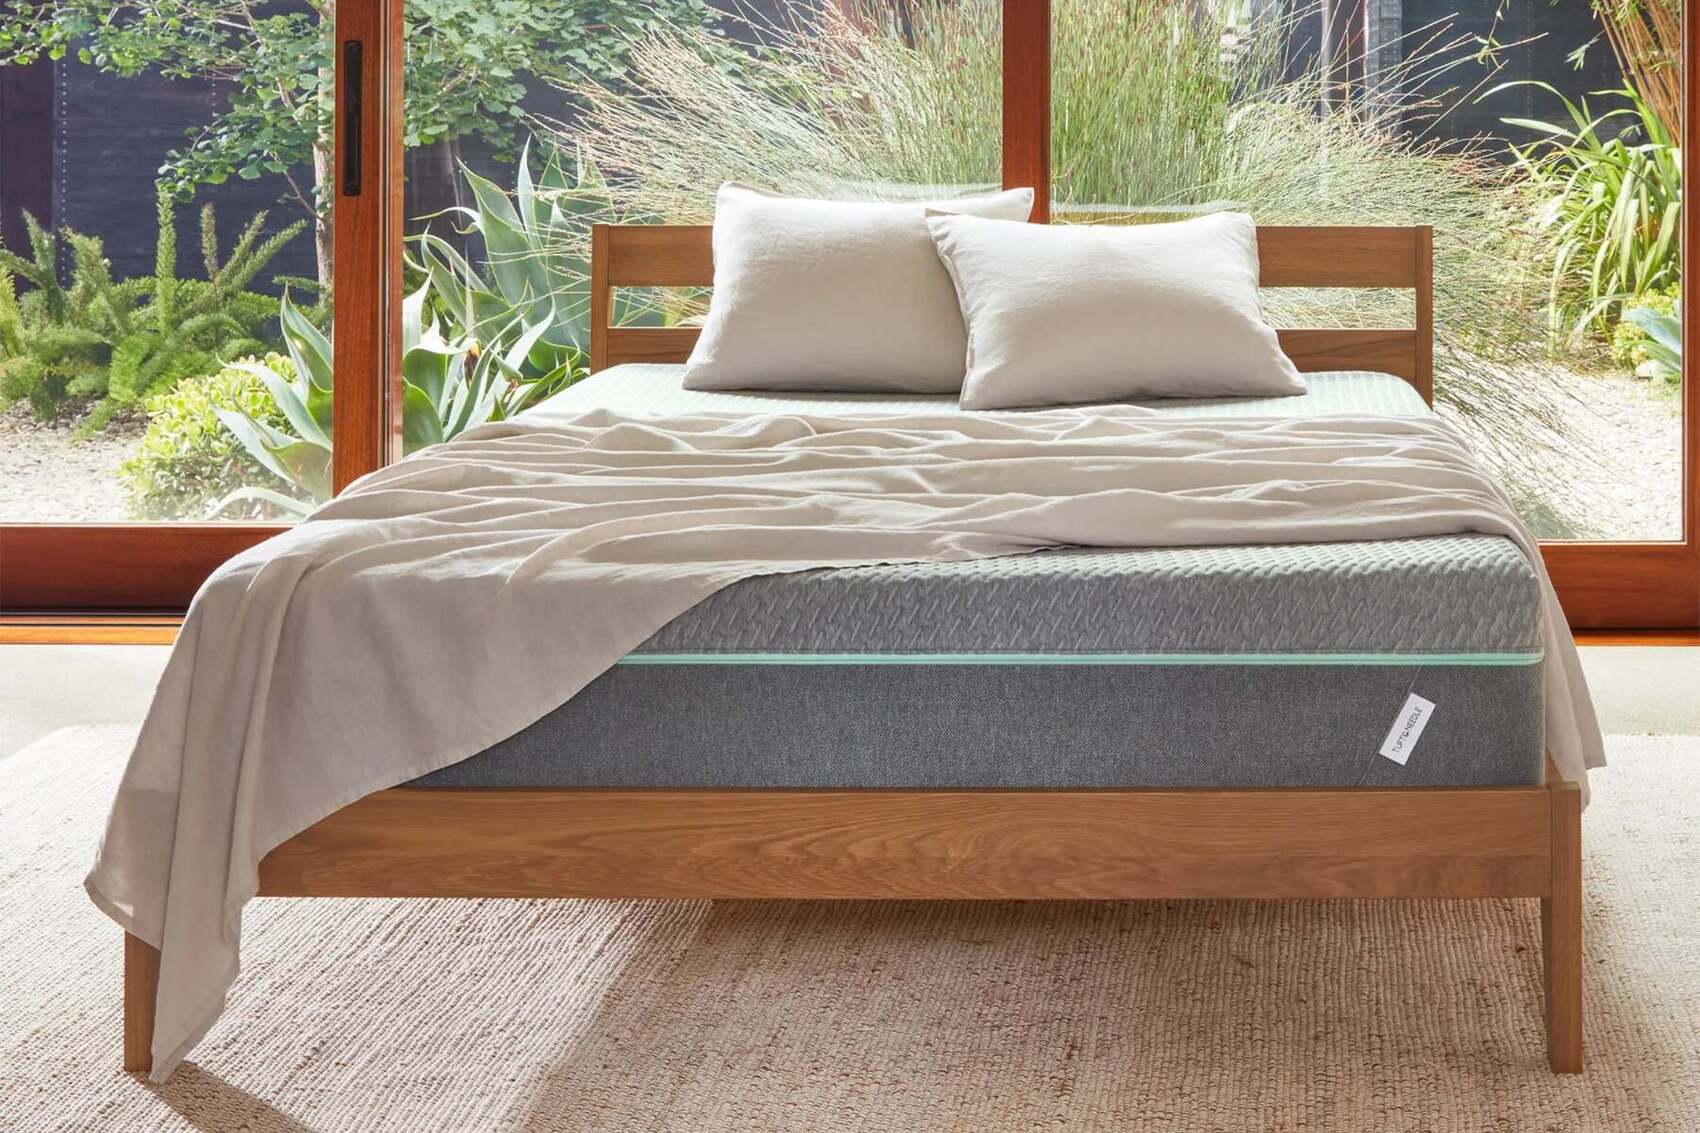 Bed Frame Types: How To Choose The Best Bed For You